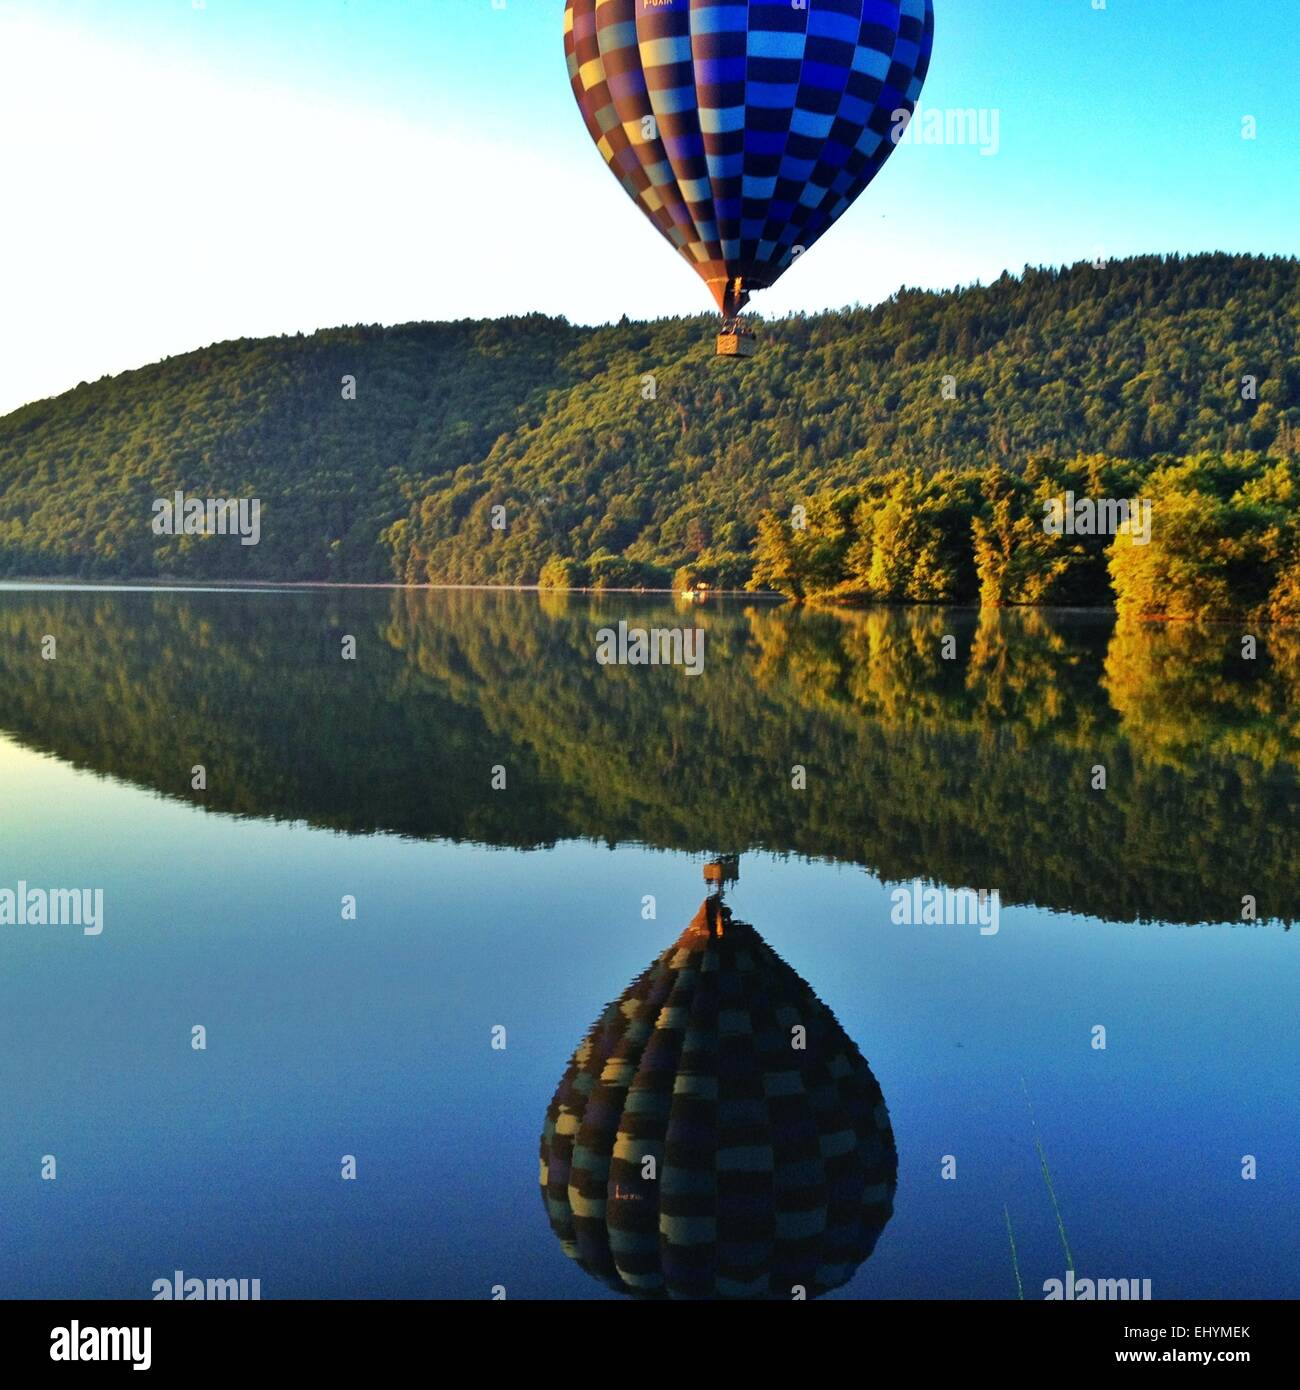 Hot air balloon over a lake in Auvergne, France Stock Photo